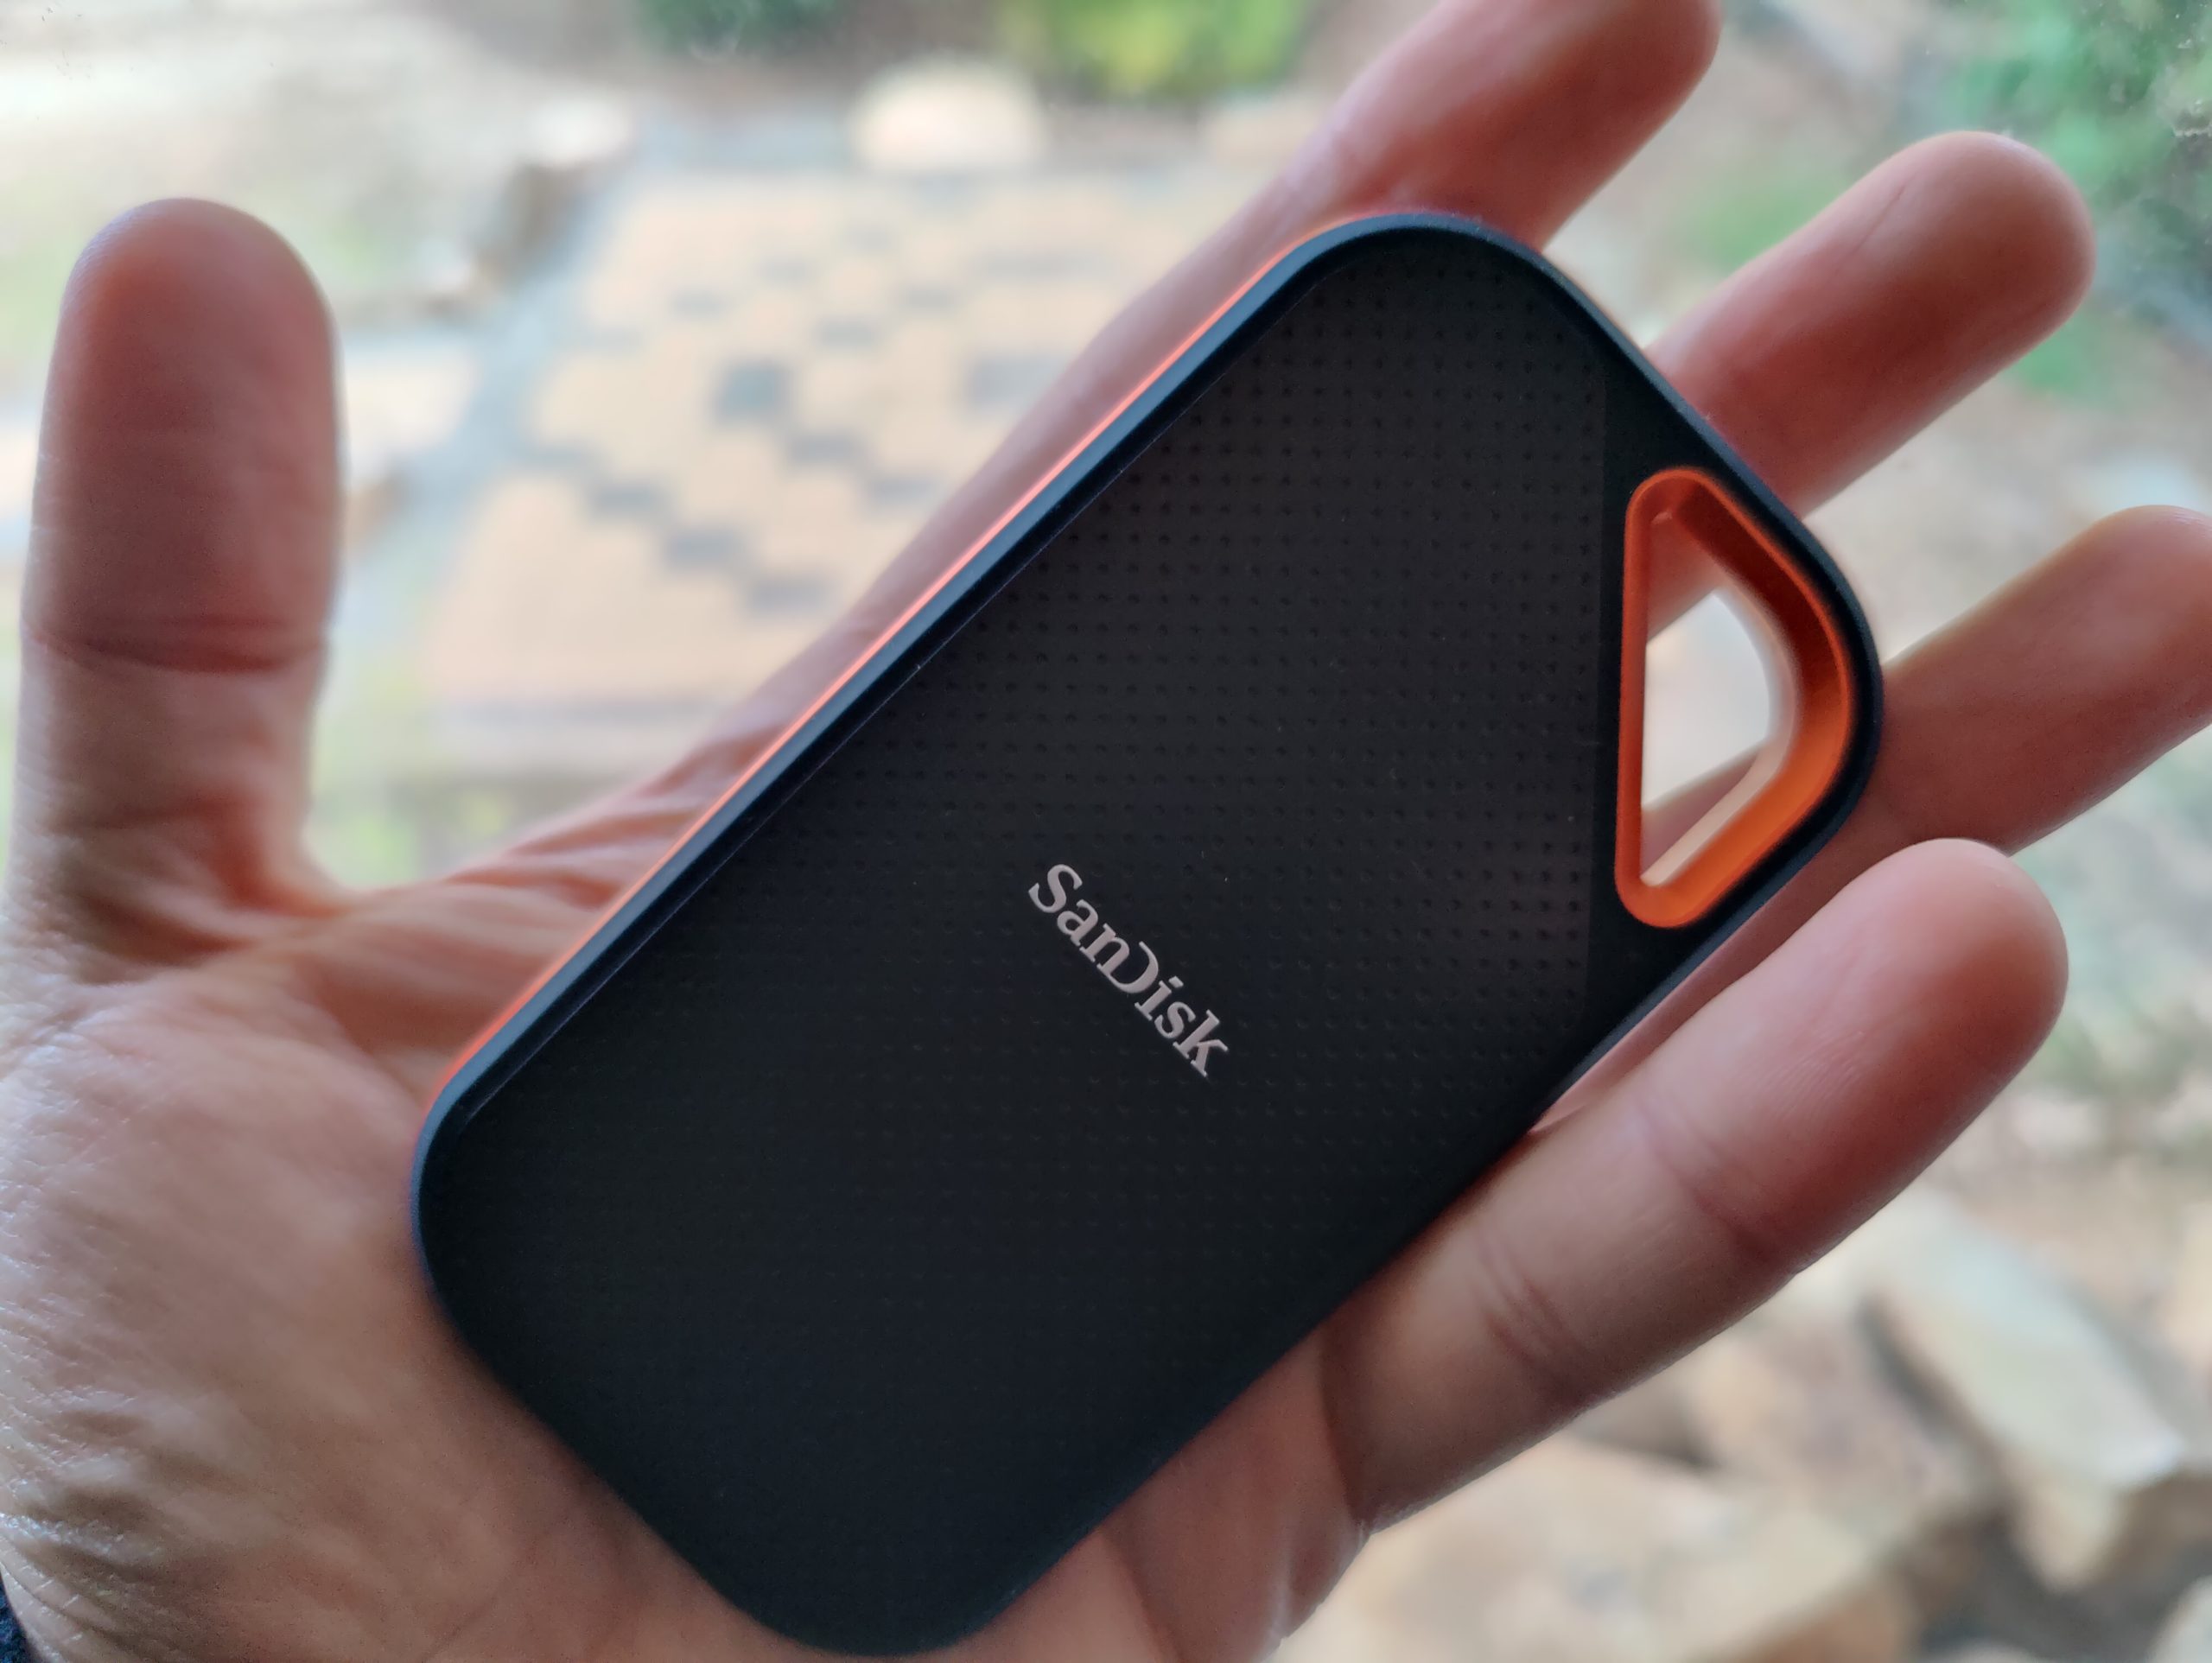 SanDisk Extreme Pro v2 Portable SSD Review: High-dollar Design and  Performance